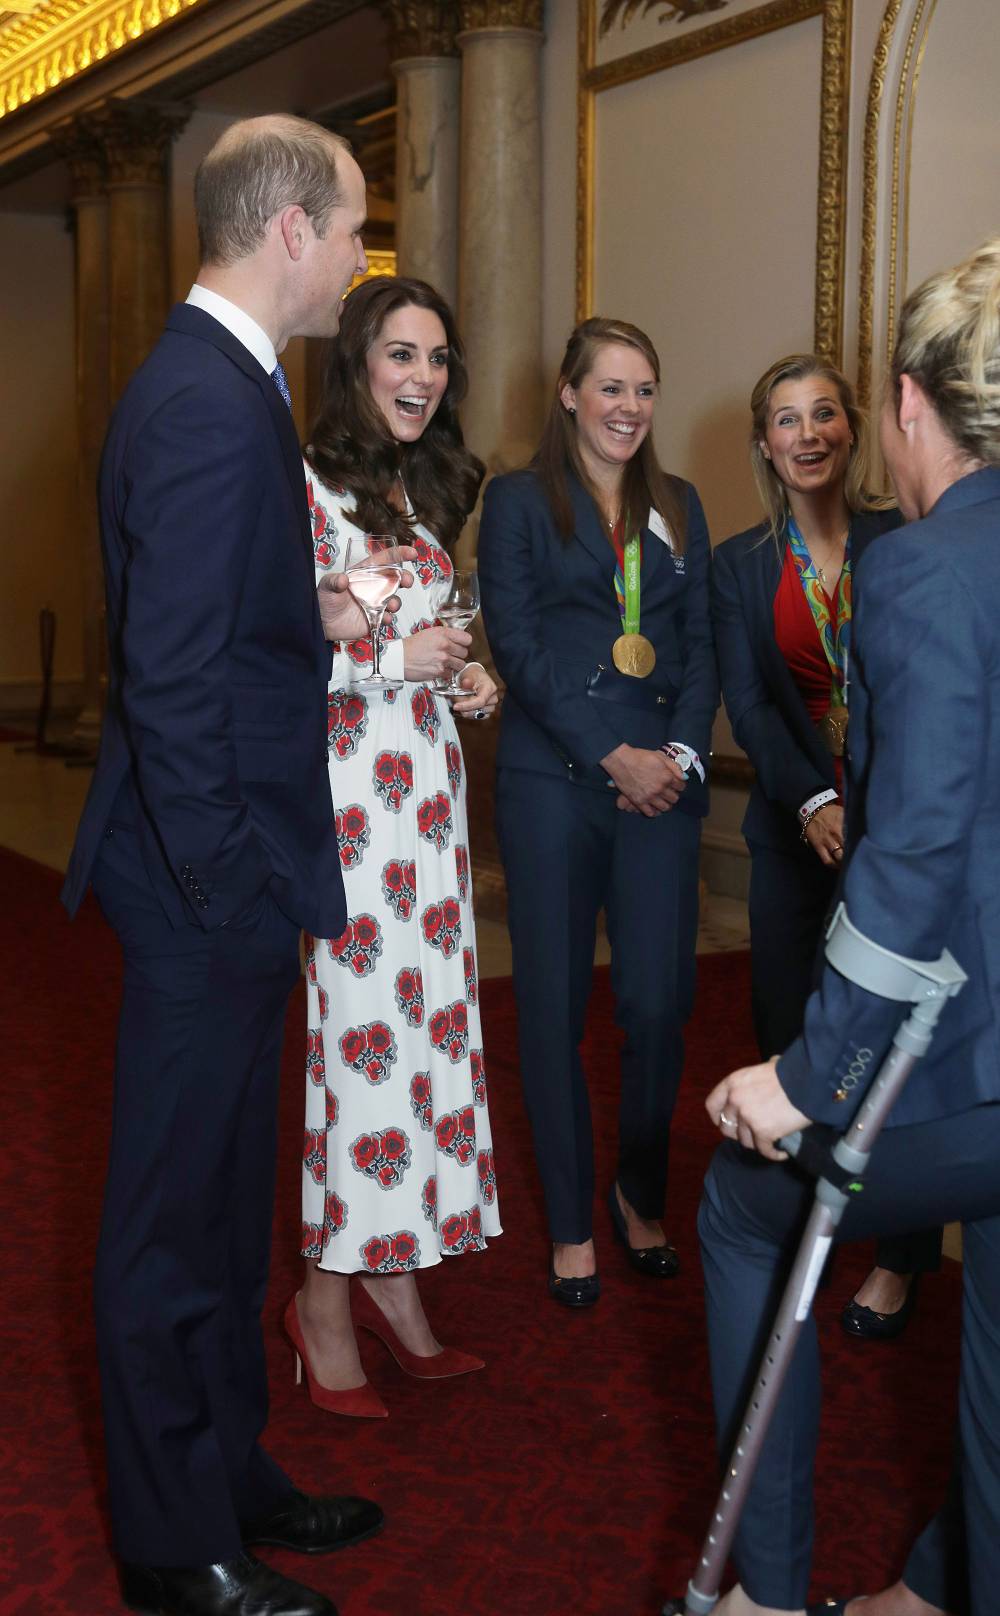 Susannah got Kate Middleton's seal of approval at the event too